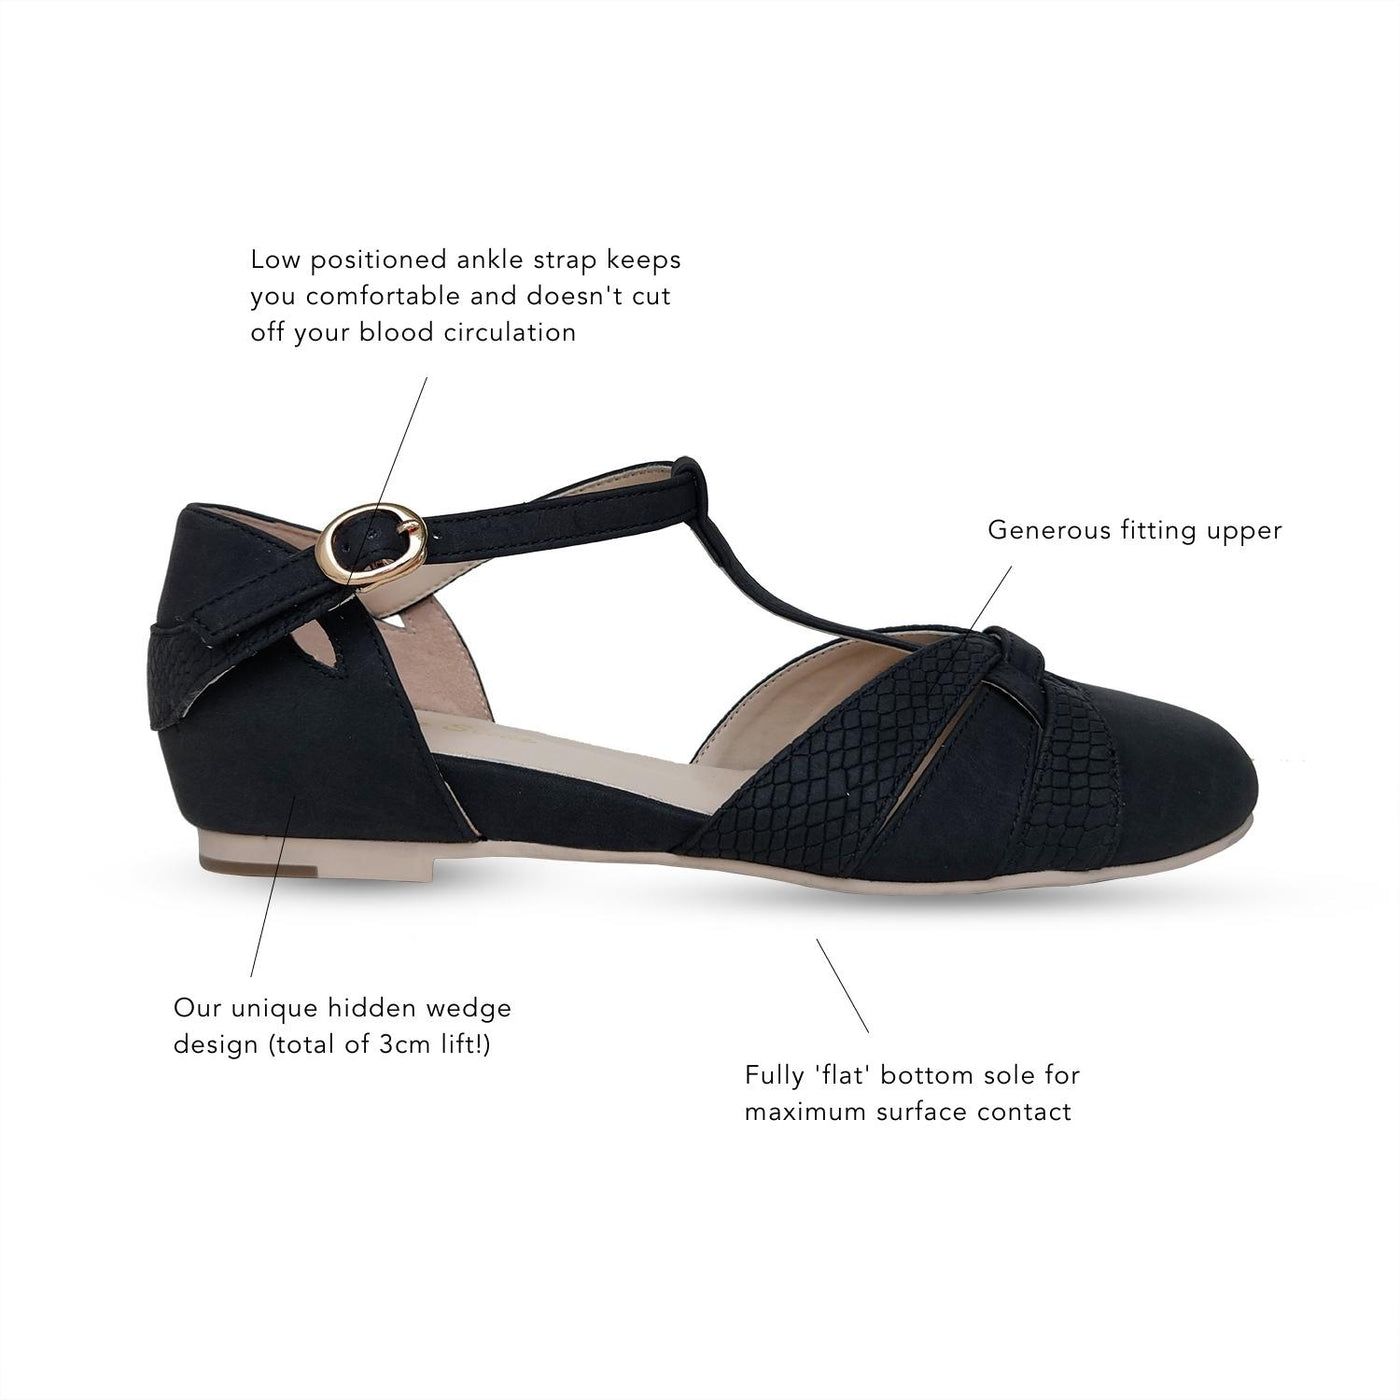 Charlie Stone Shoes elegant and classic vintage inspired ladies flats made with GRS certified recycled materials